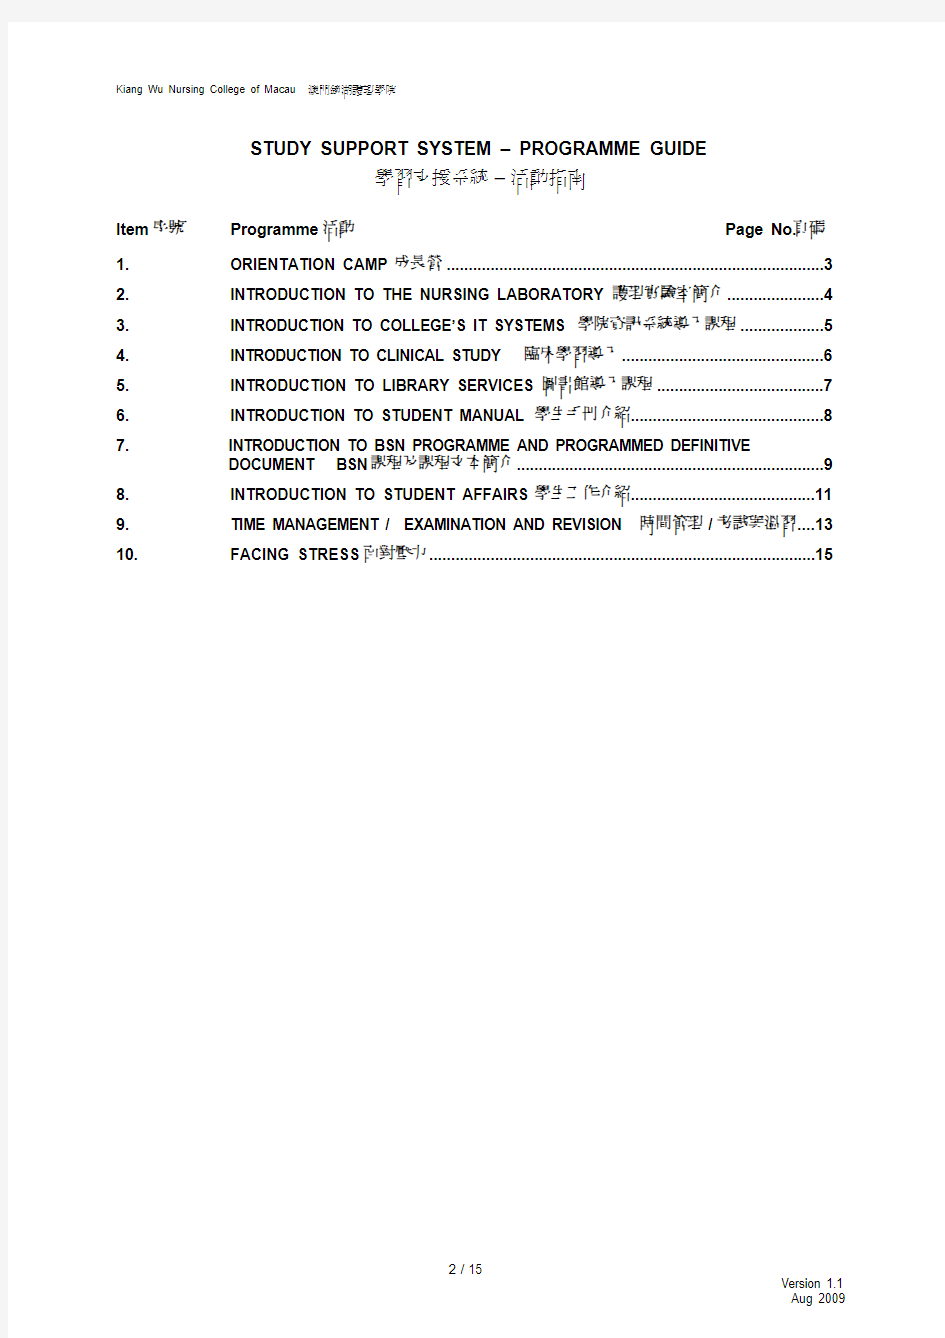 STUDY SUPPORT SYSTEM - PROGRAMME GUIDE(1st SEMESTER)